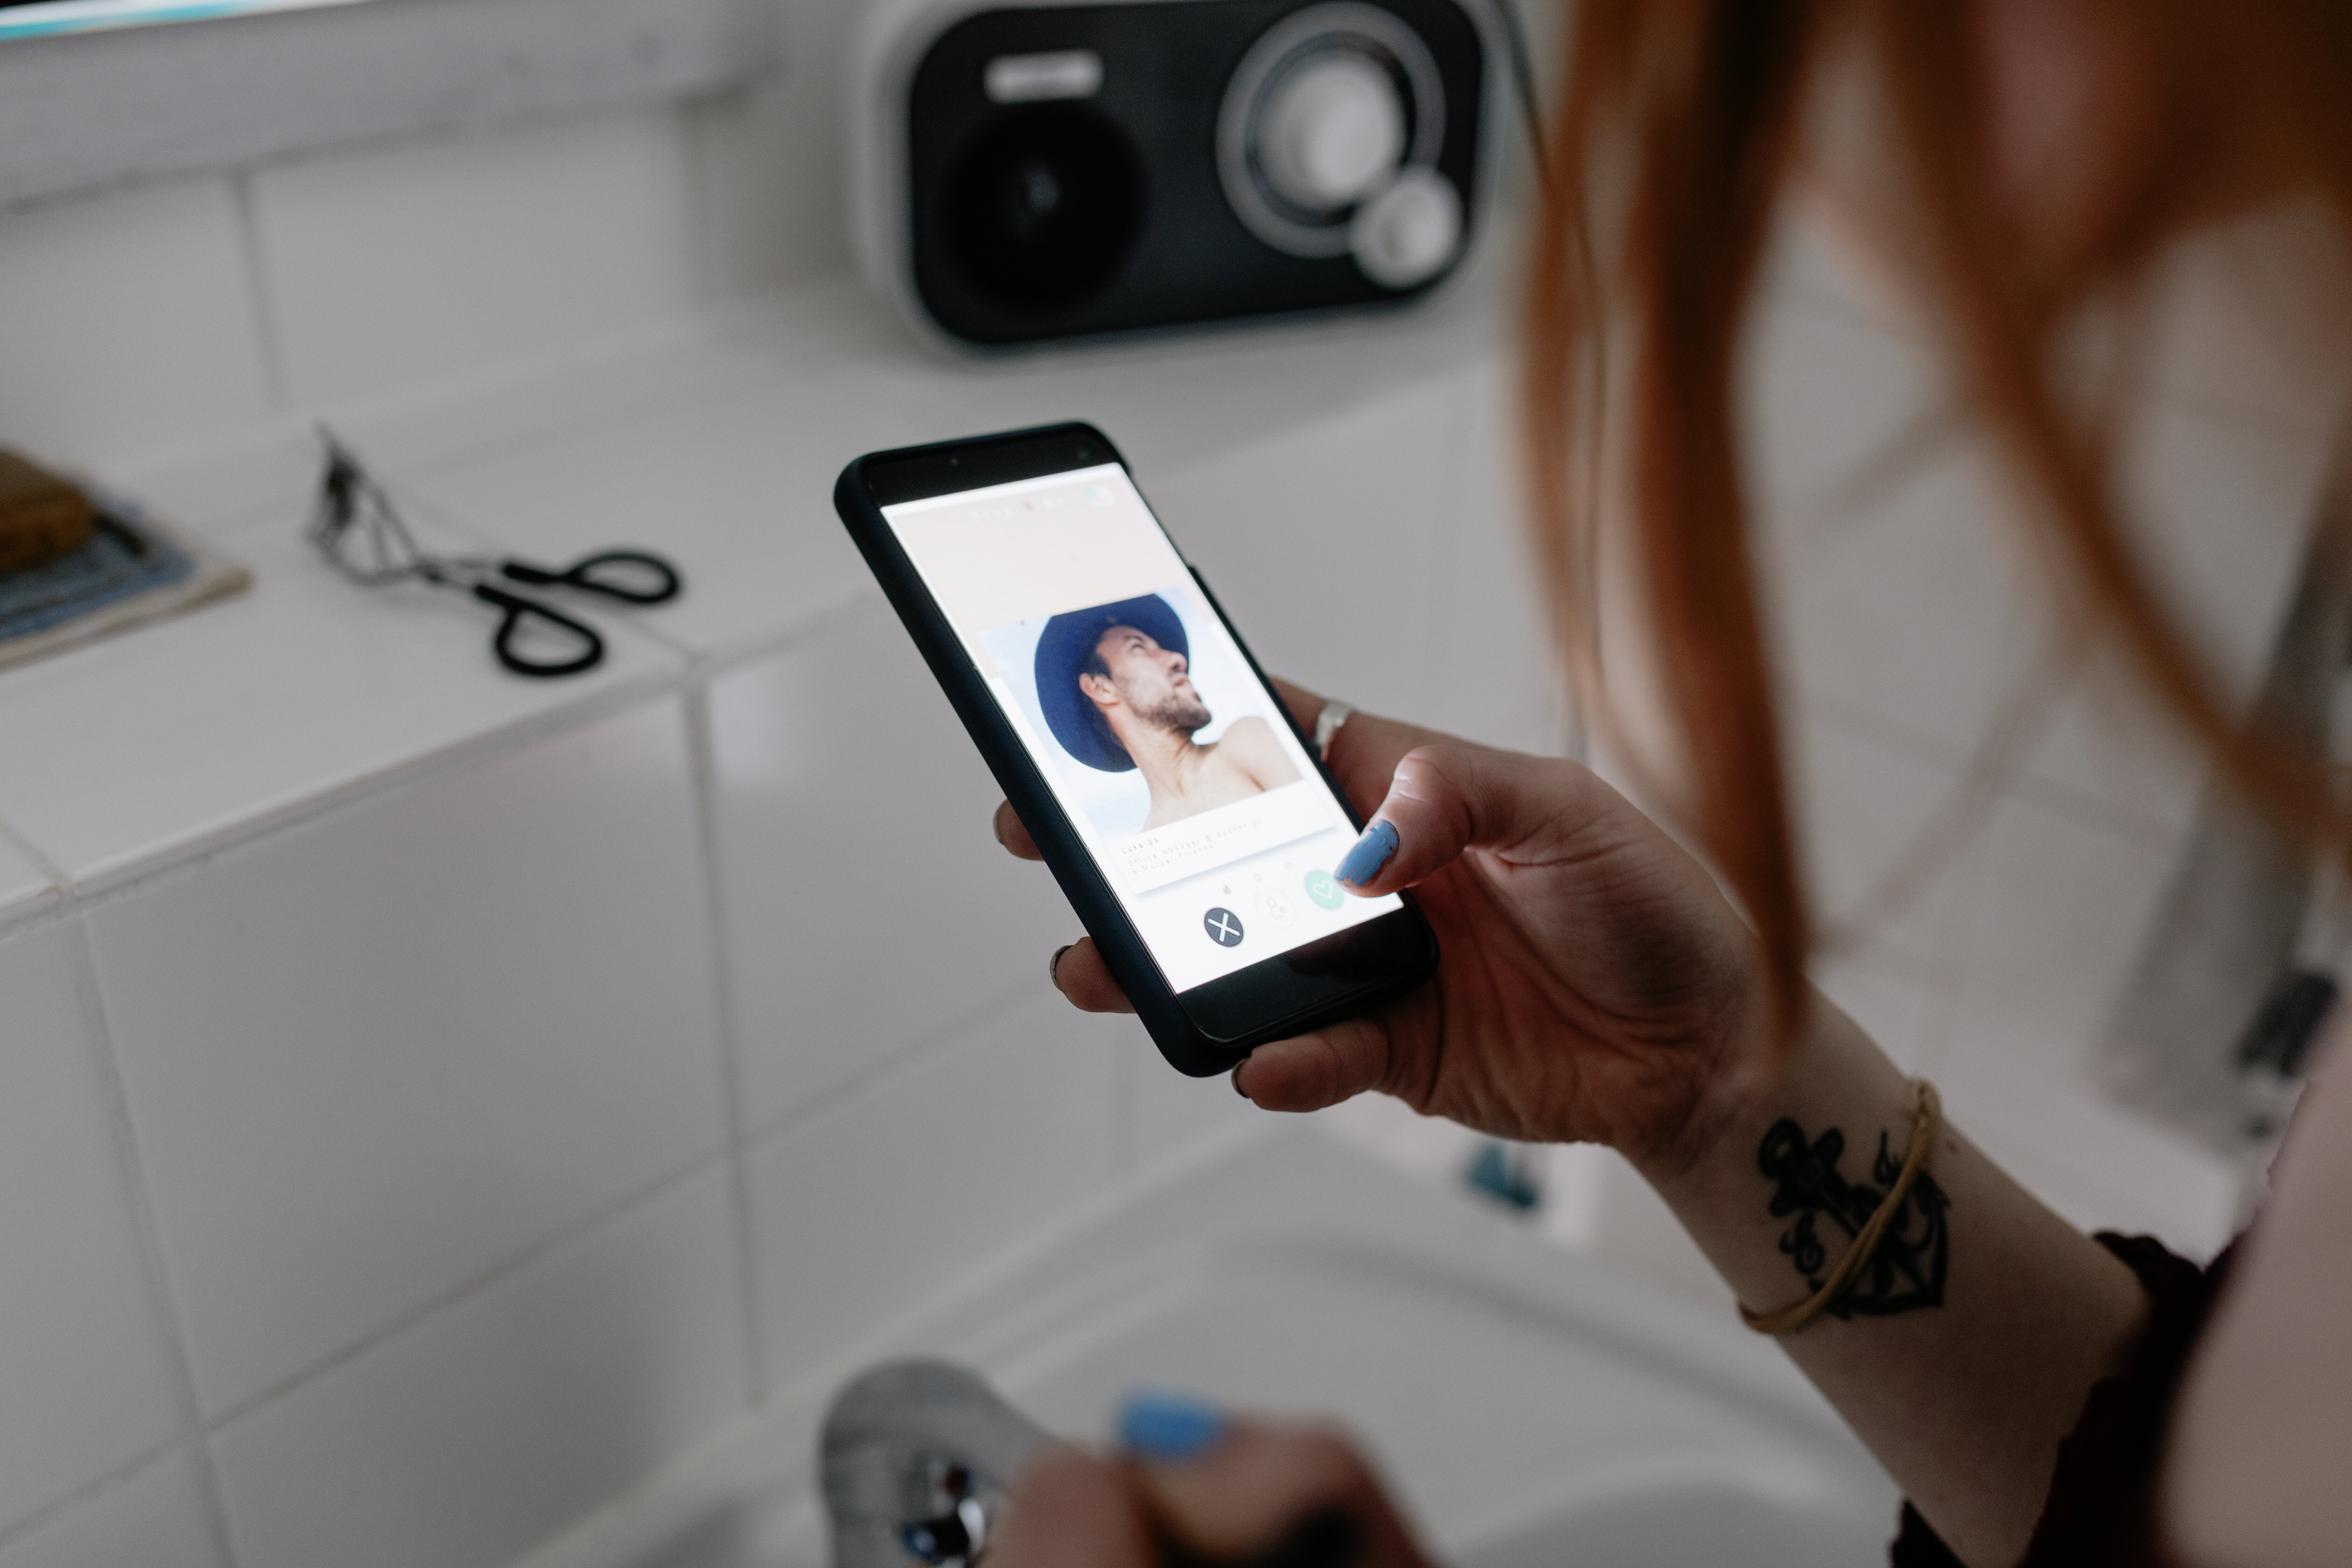 Person holding smartphone with a photo of a person displayed on screen, in a bathroom setting